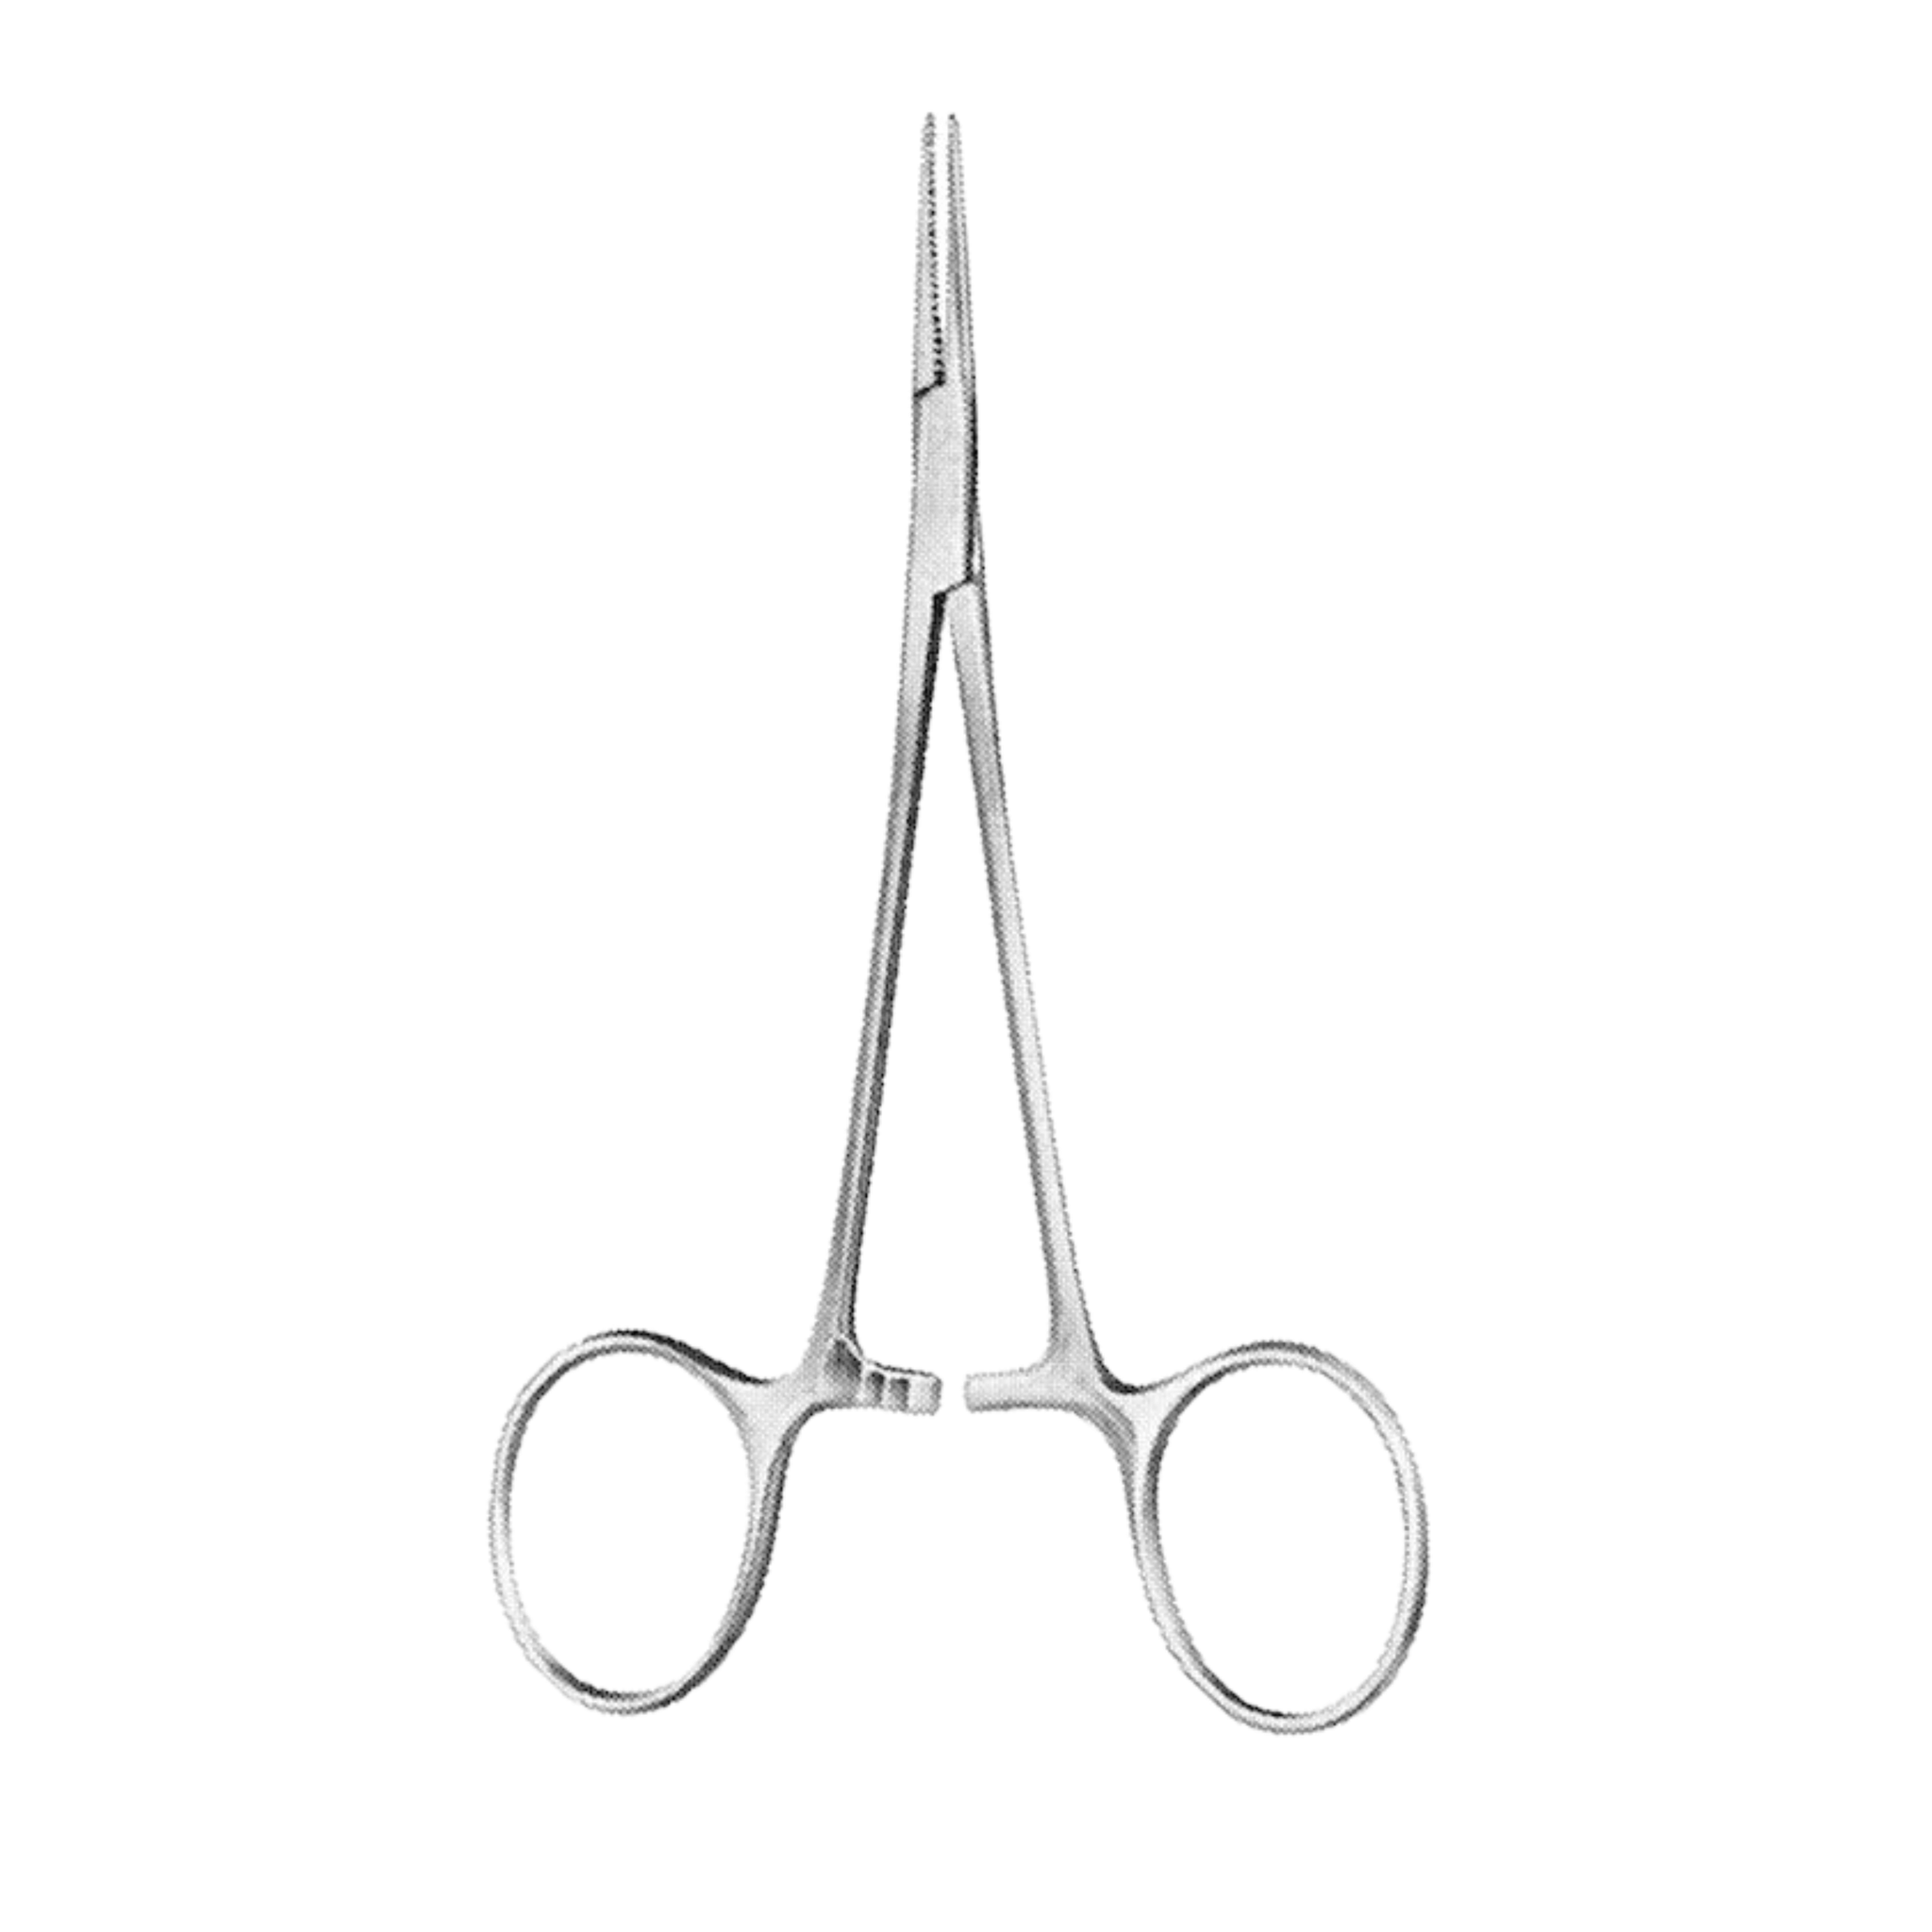 Micro Mosquito Forceps- Curved, 12 cm